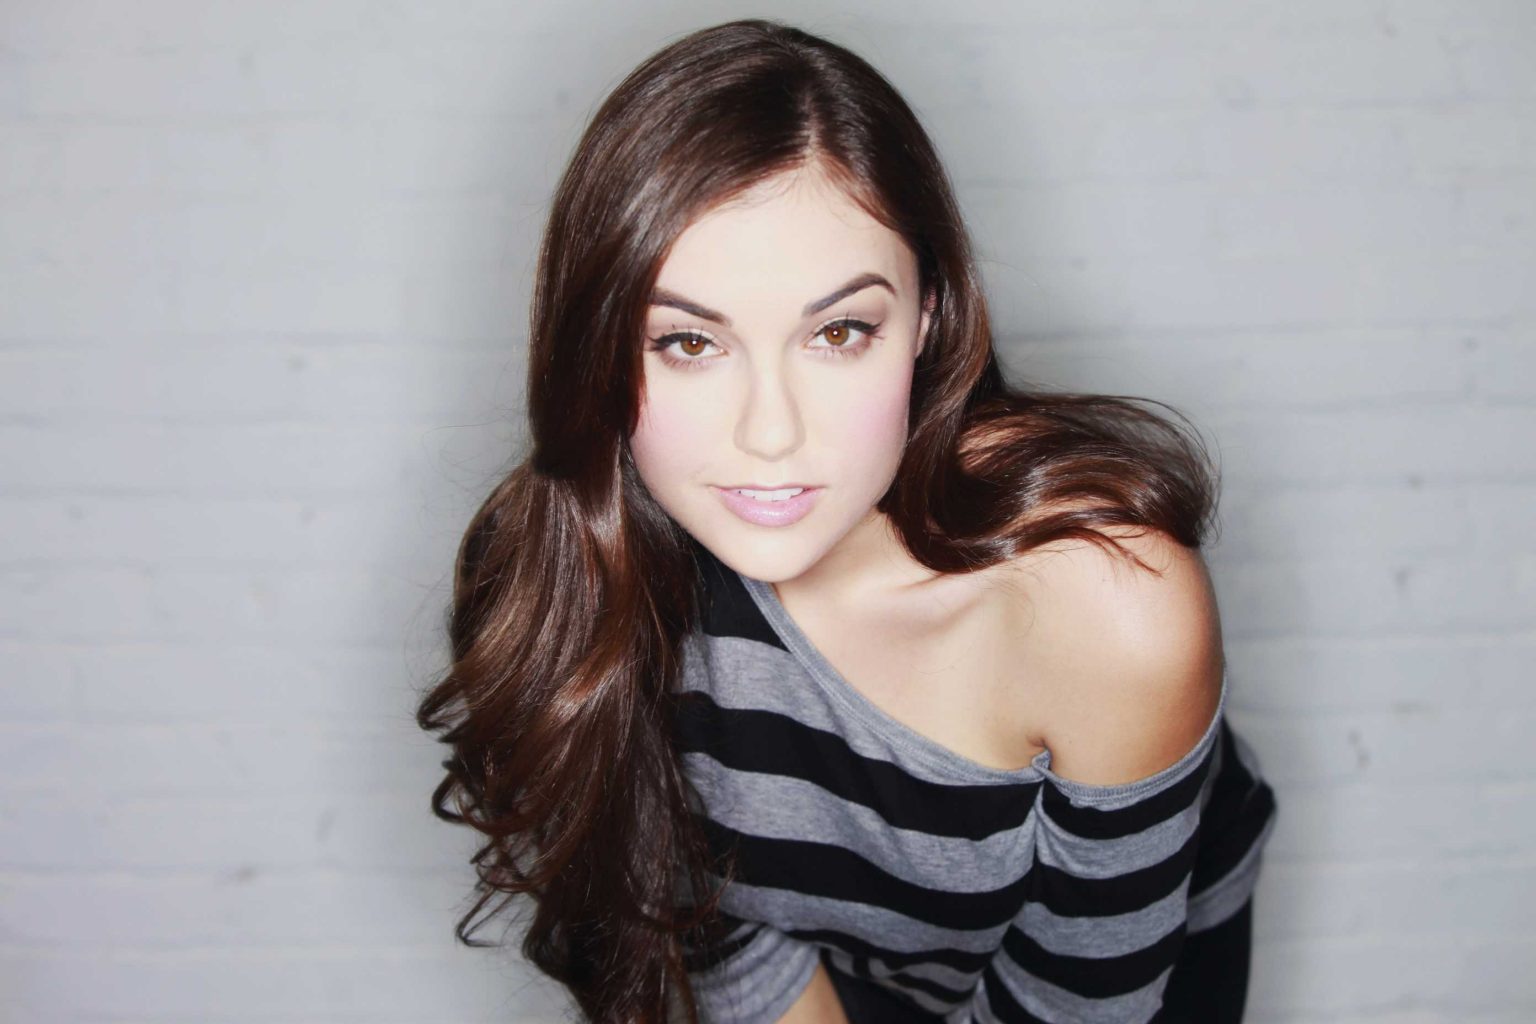 44 Sasha Grey Nude Pictures Can Be Pleasurable And Pleasing To Look At 272